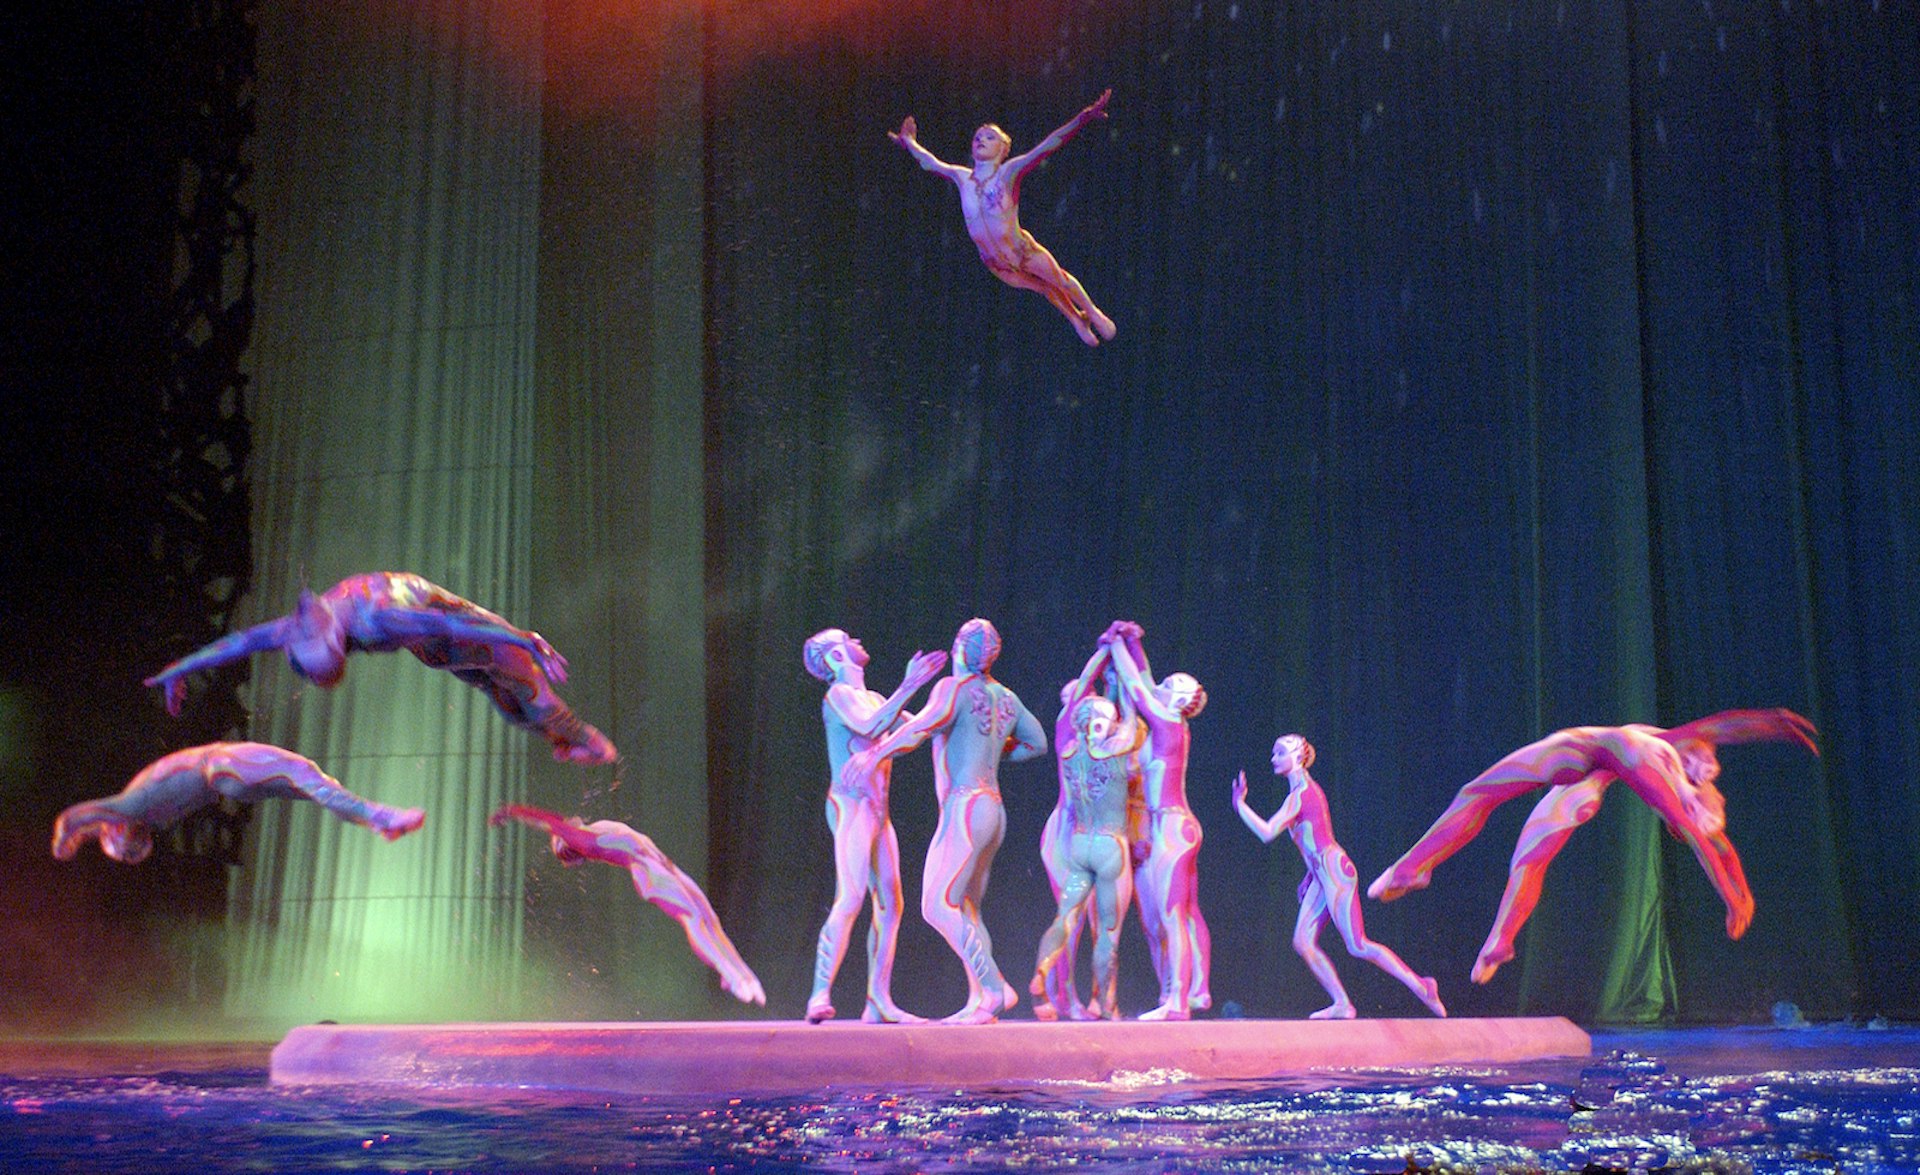 Acrobats of Cirque du Soleil performing Barge from "O" in Las Vegas